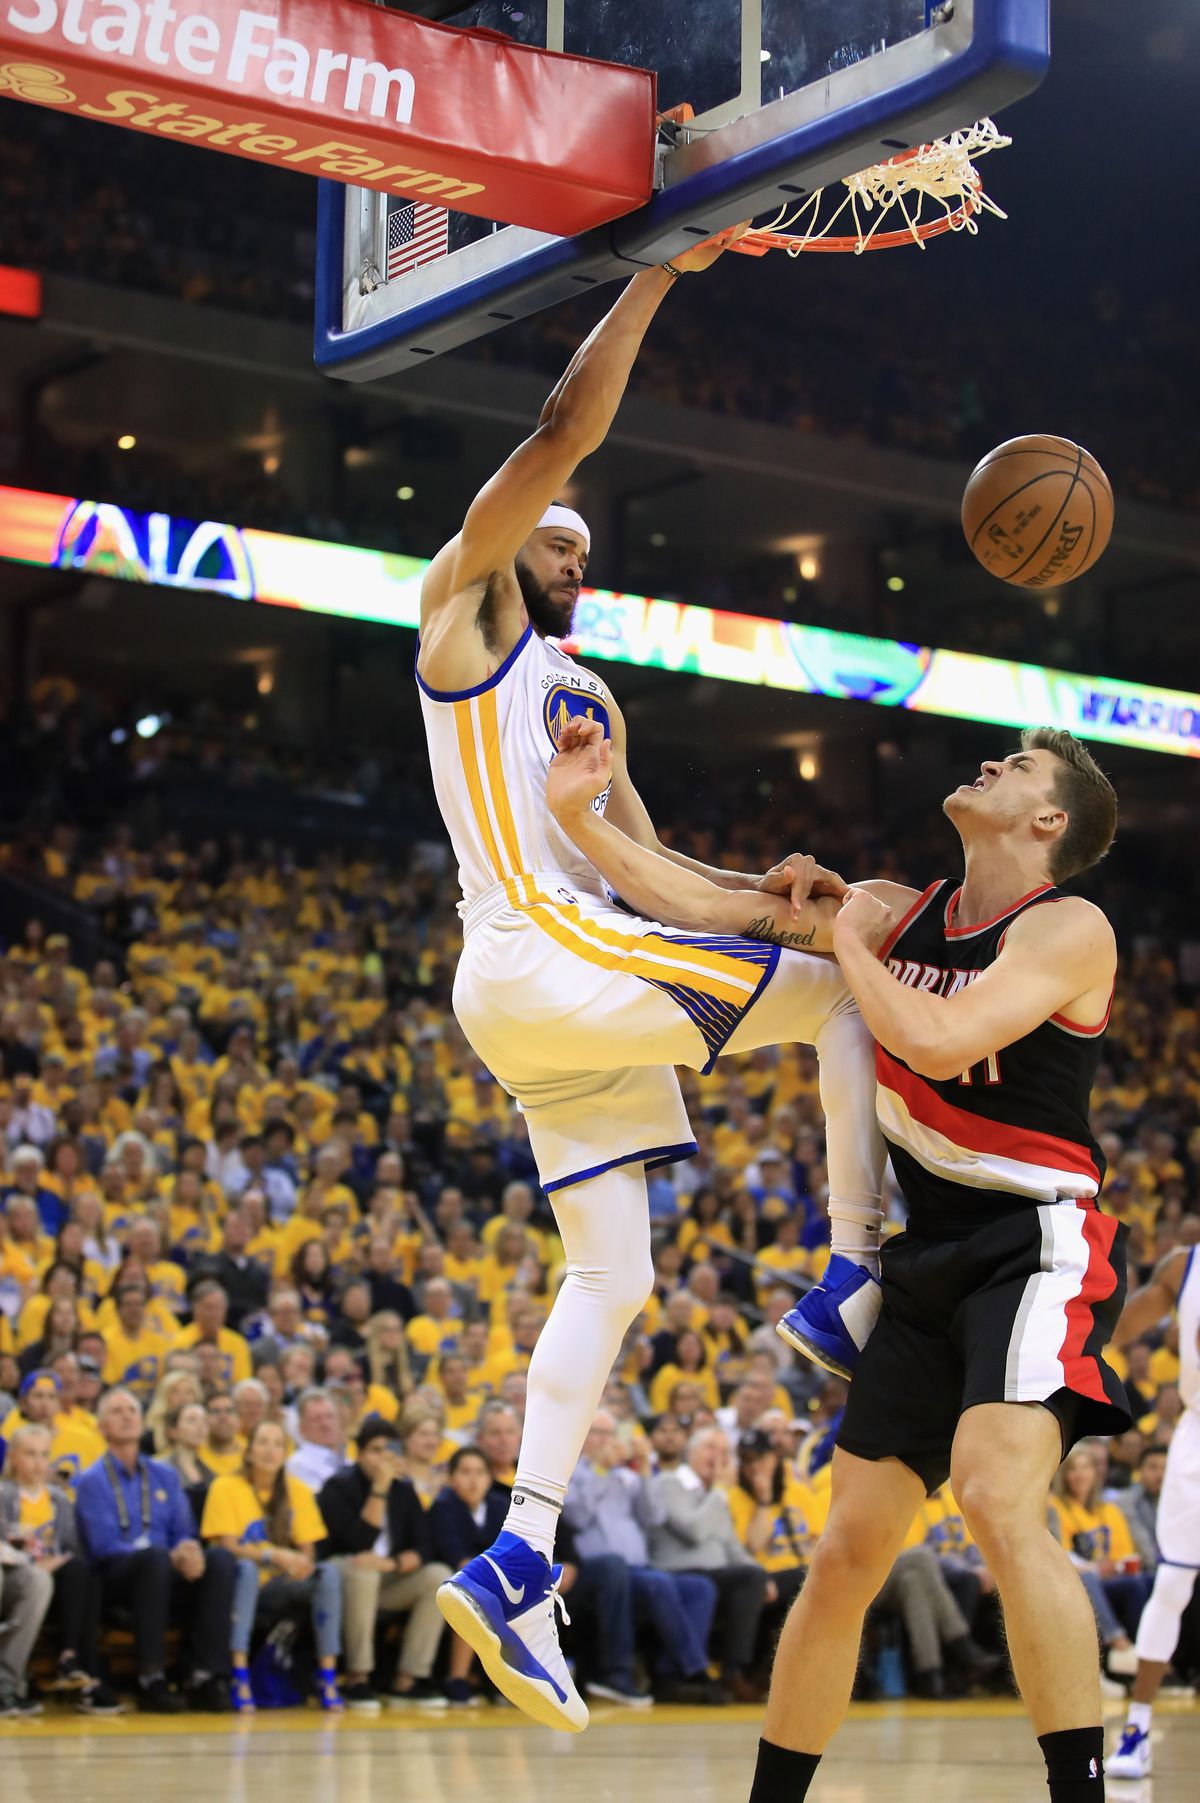 Portland Trail Blazers center Meyers Leonard gets dunked on by Golden State Warriors center JaVale McGee